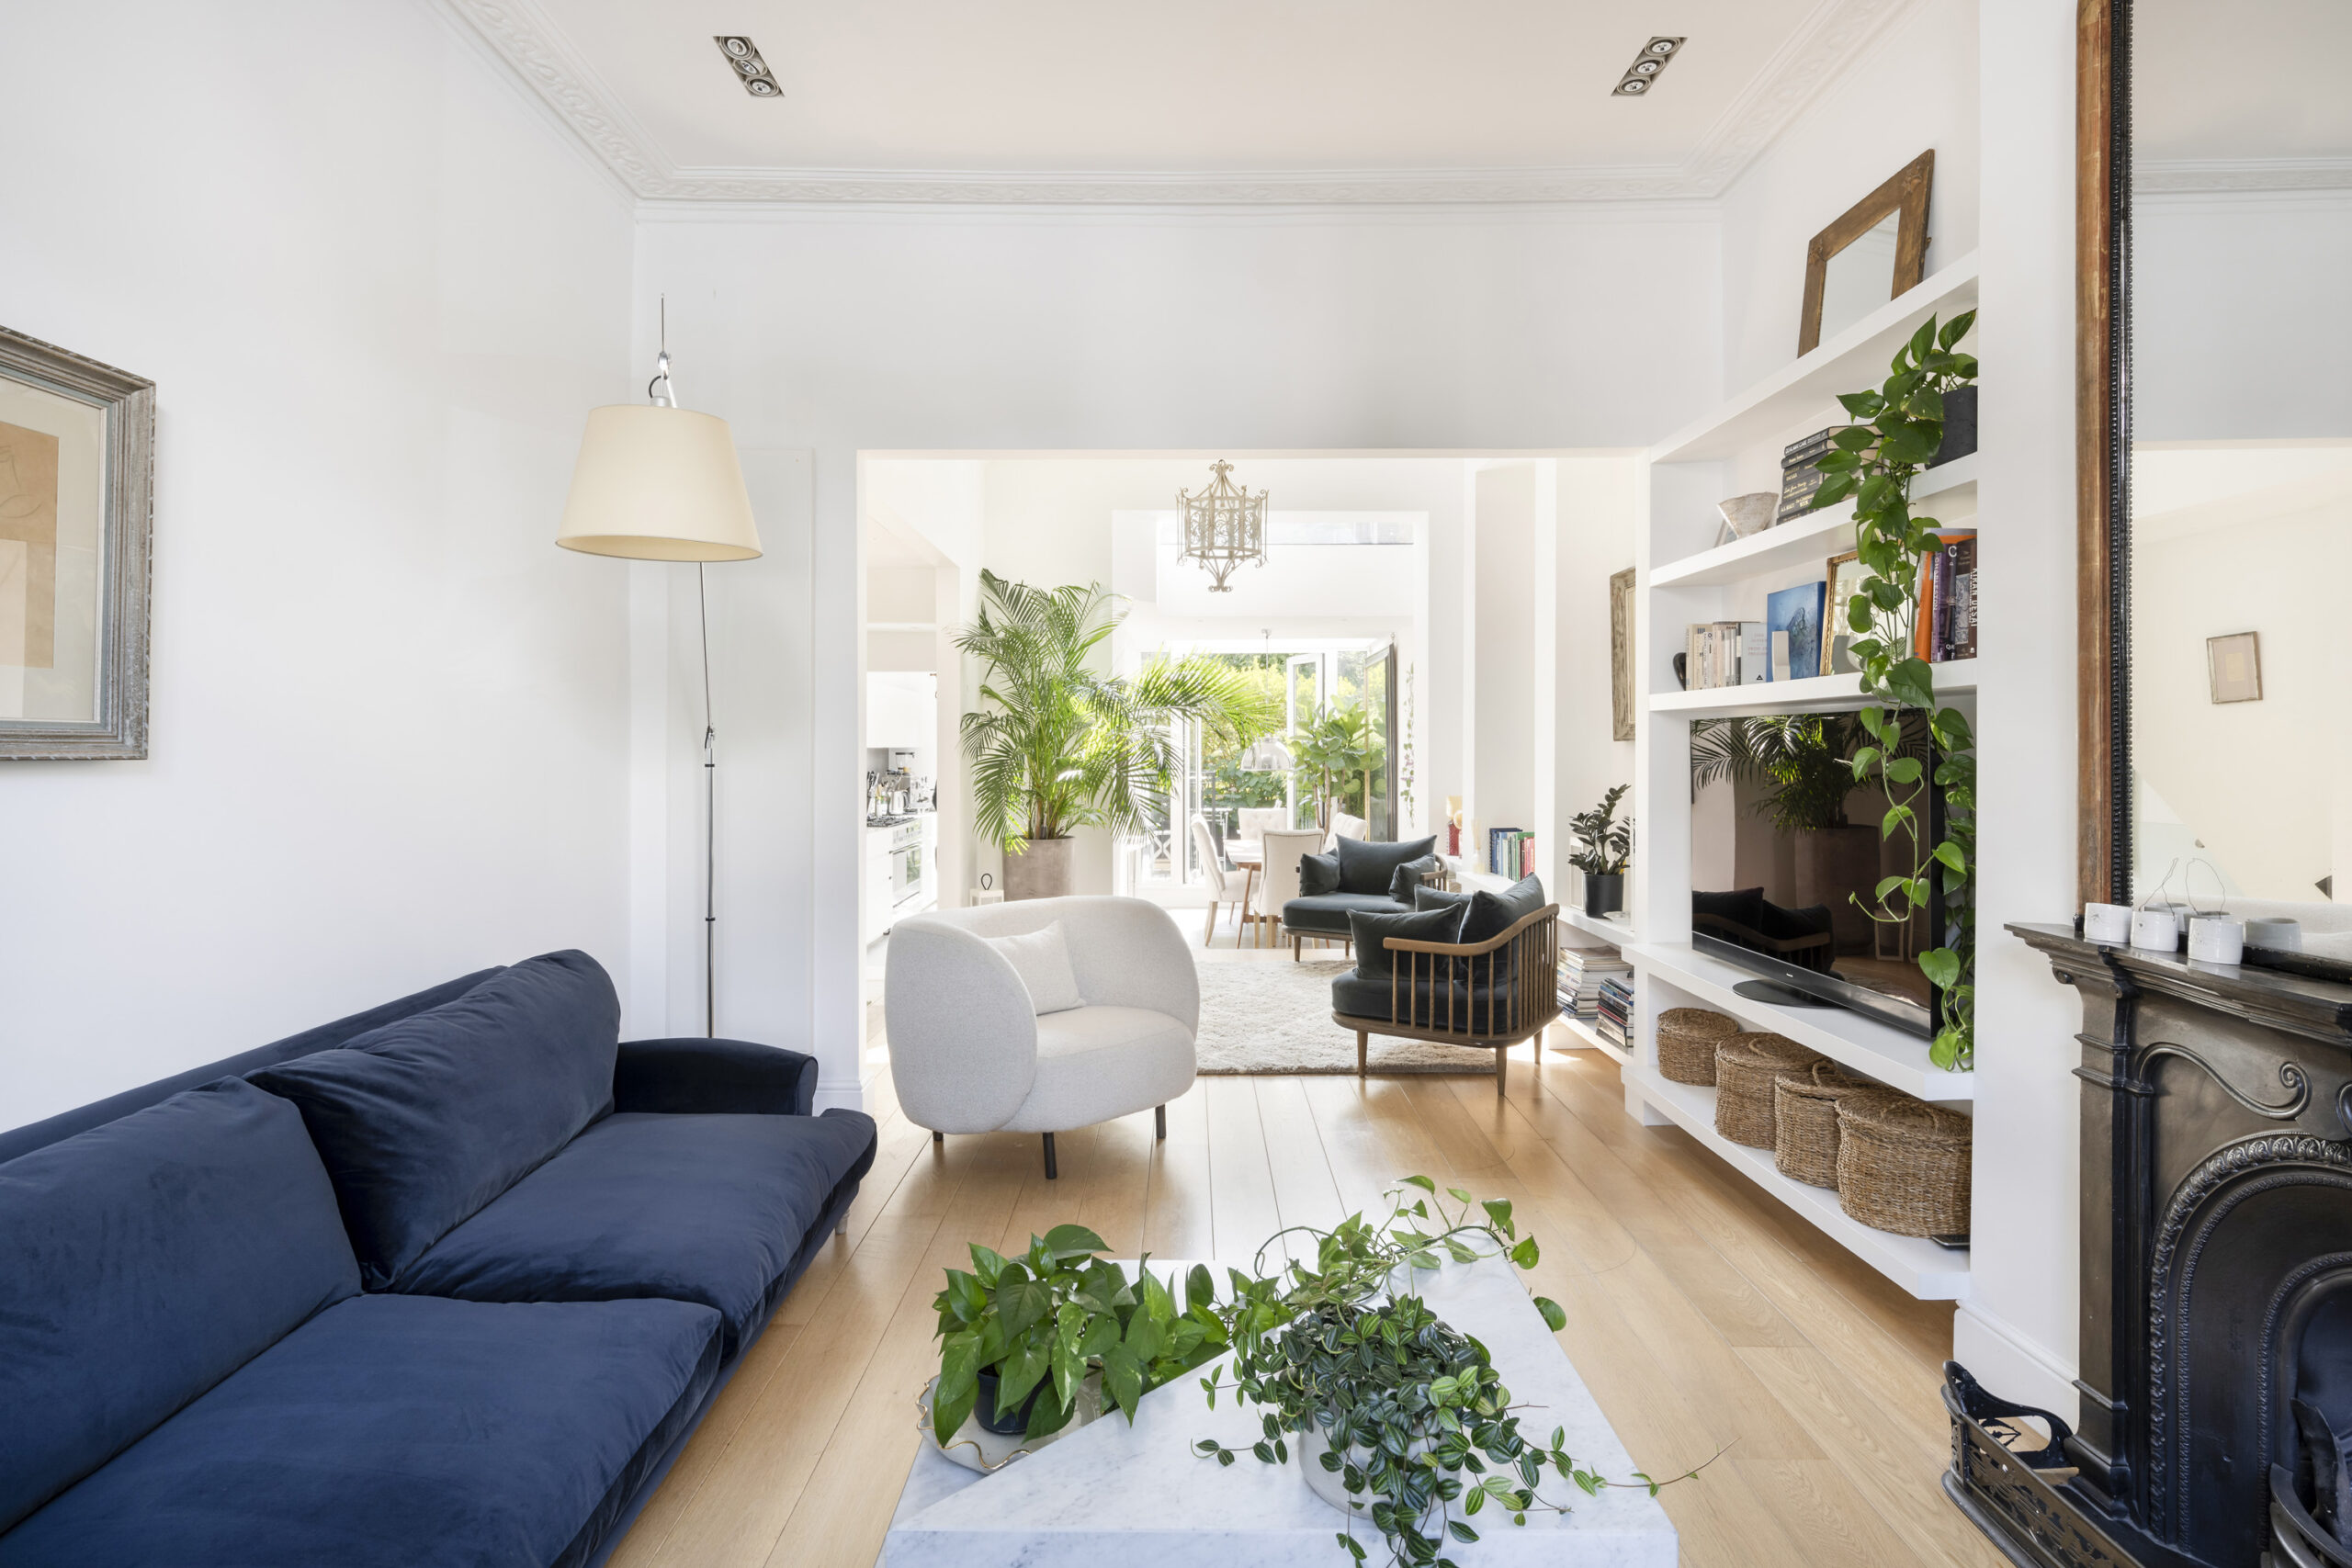 Stylish open-plan reception room of a luxury two-bedroom maisonette for sale in Notting Hill